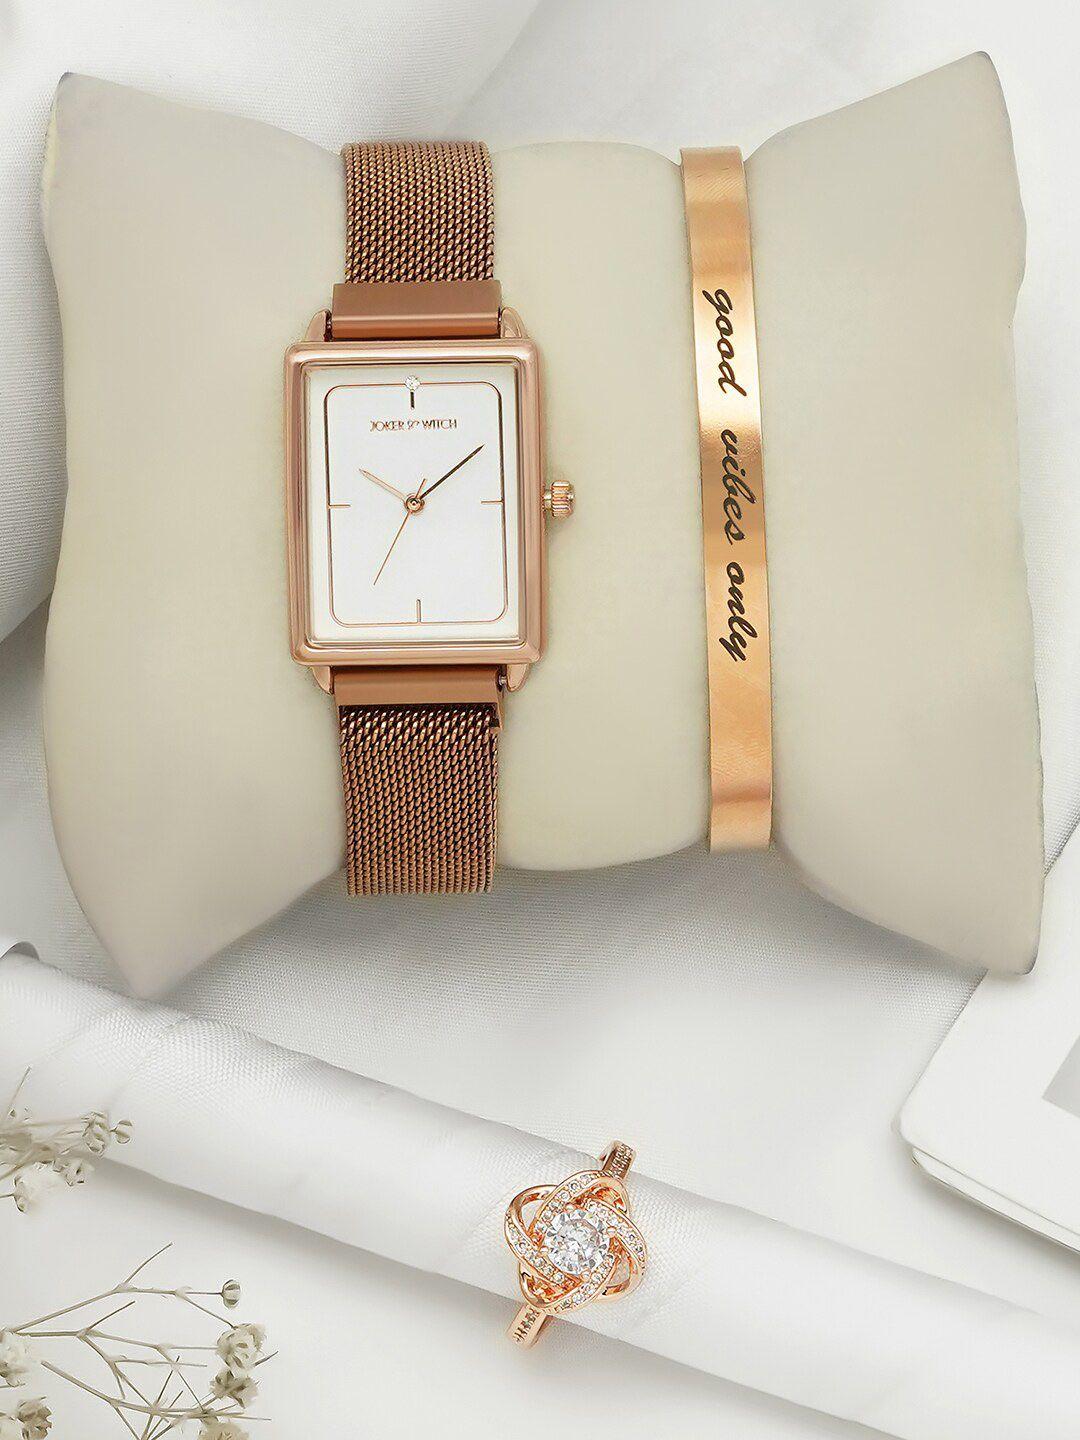 joker & witch women rose gold toned analogue watch with bracelet and ring gift set